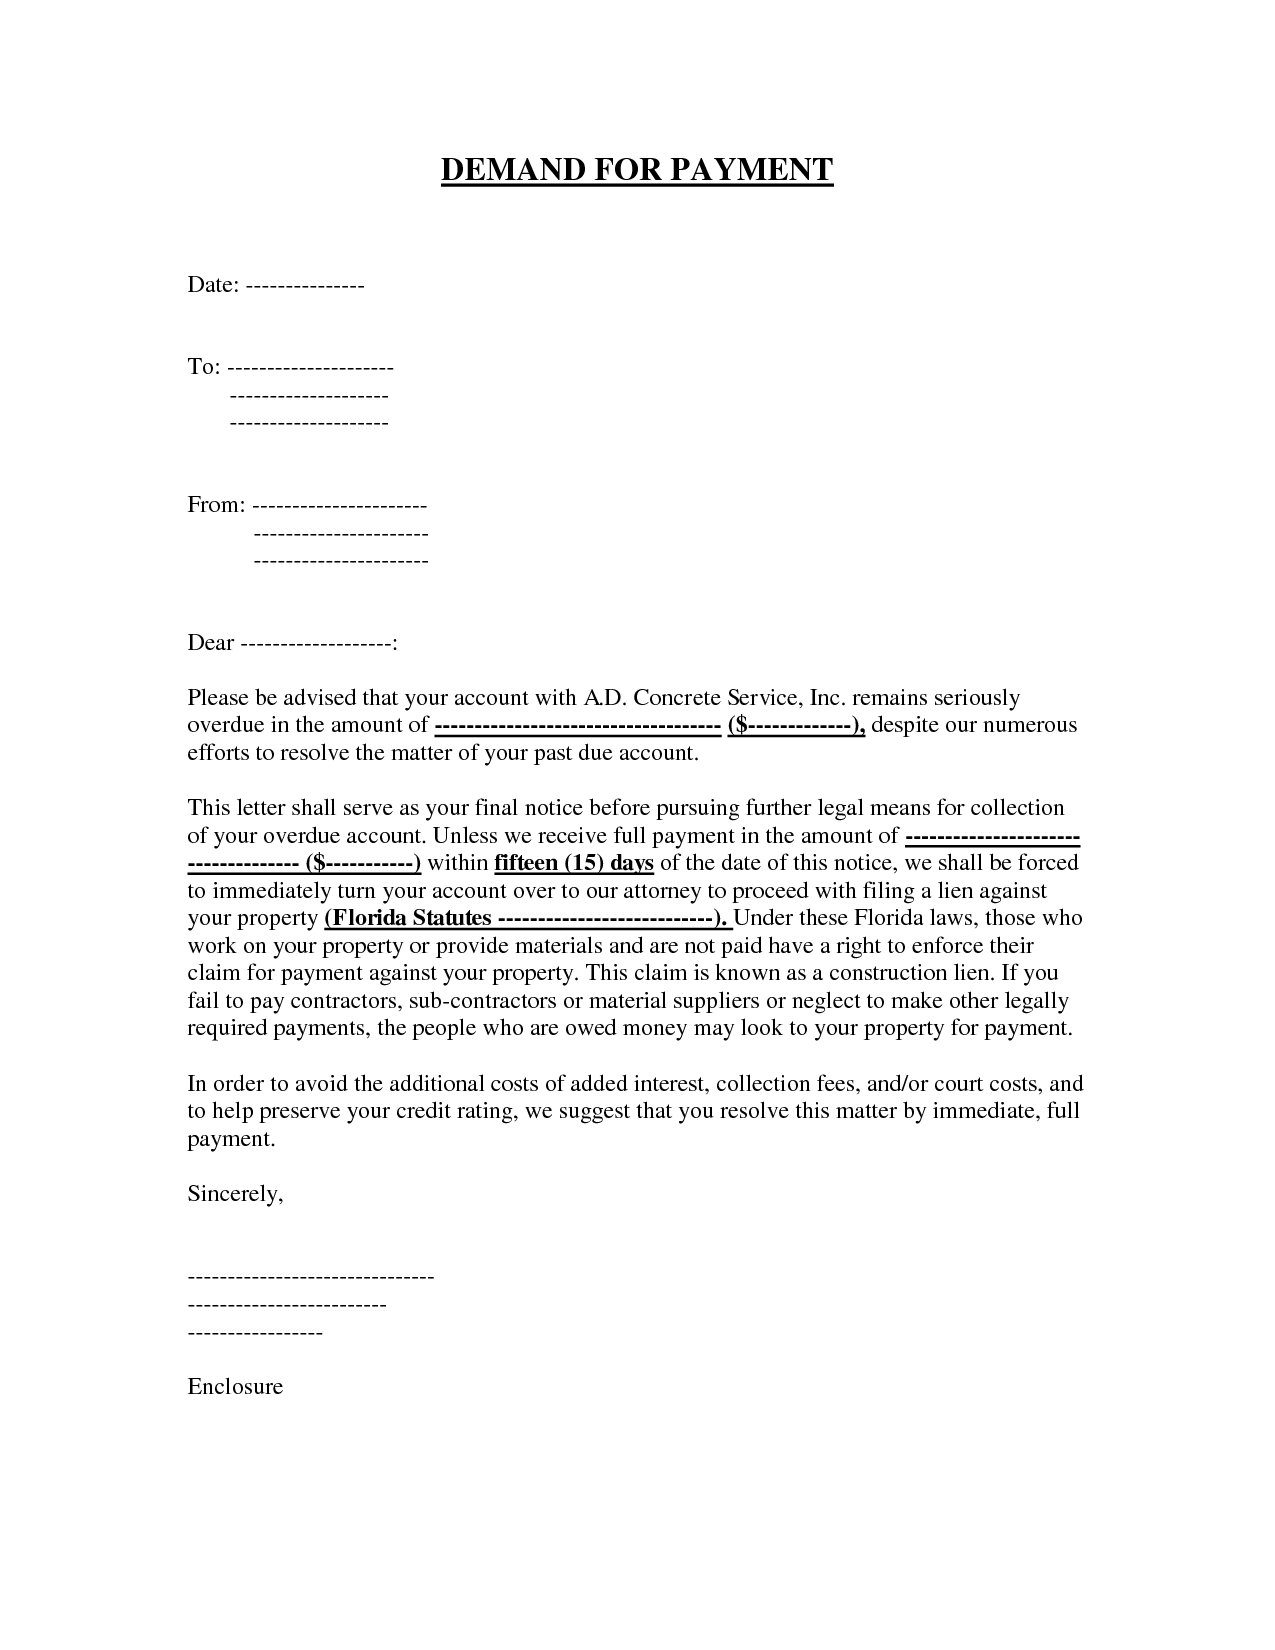 Final Demand for Payment Letter Template - How to Write A Payment Letter Gallery Letter format formal Sample